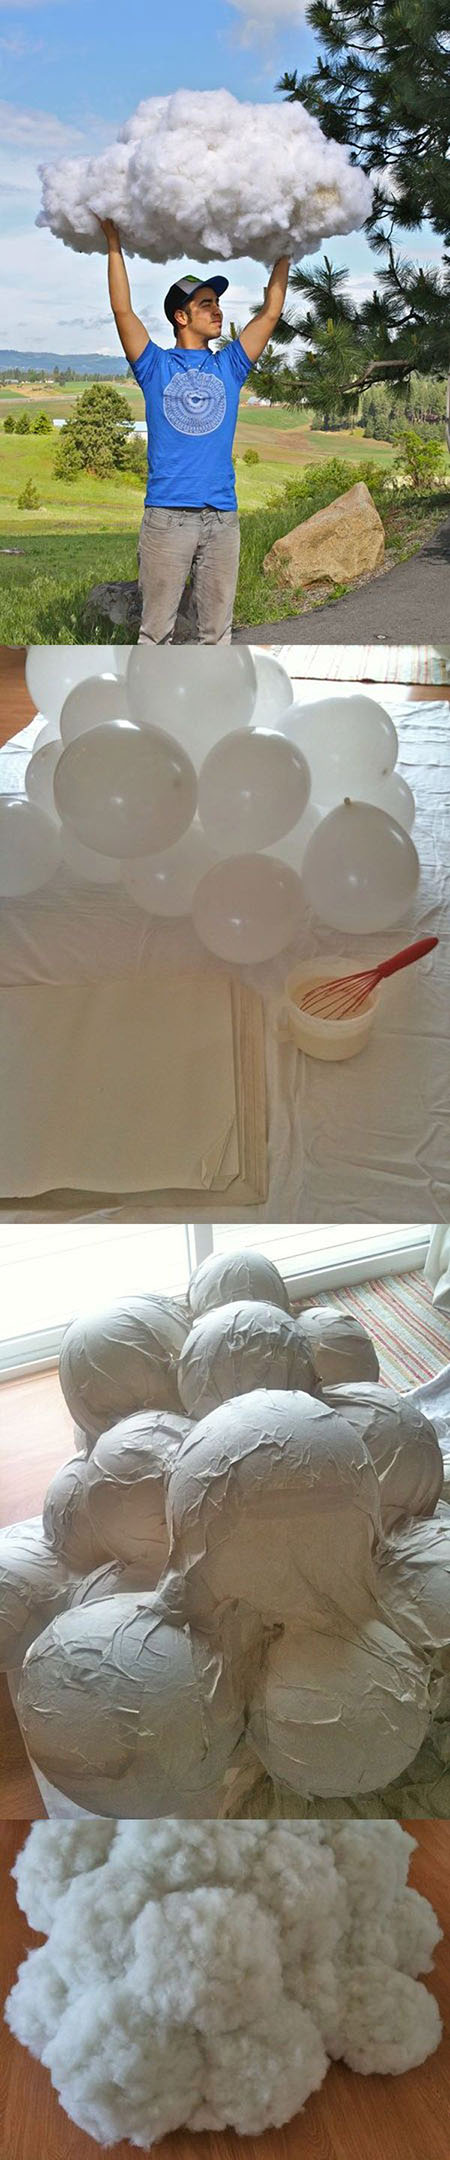 3 How To Make A Cloud - fun for a kid's party0c26d